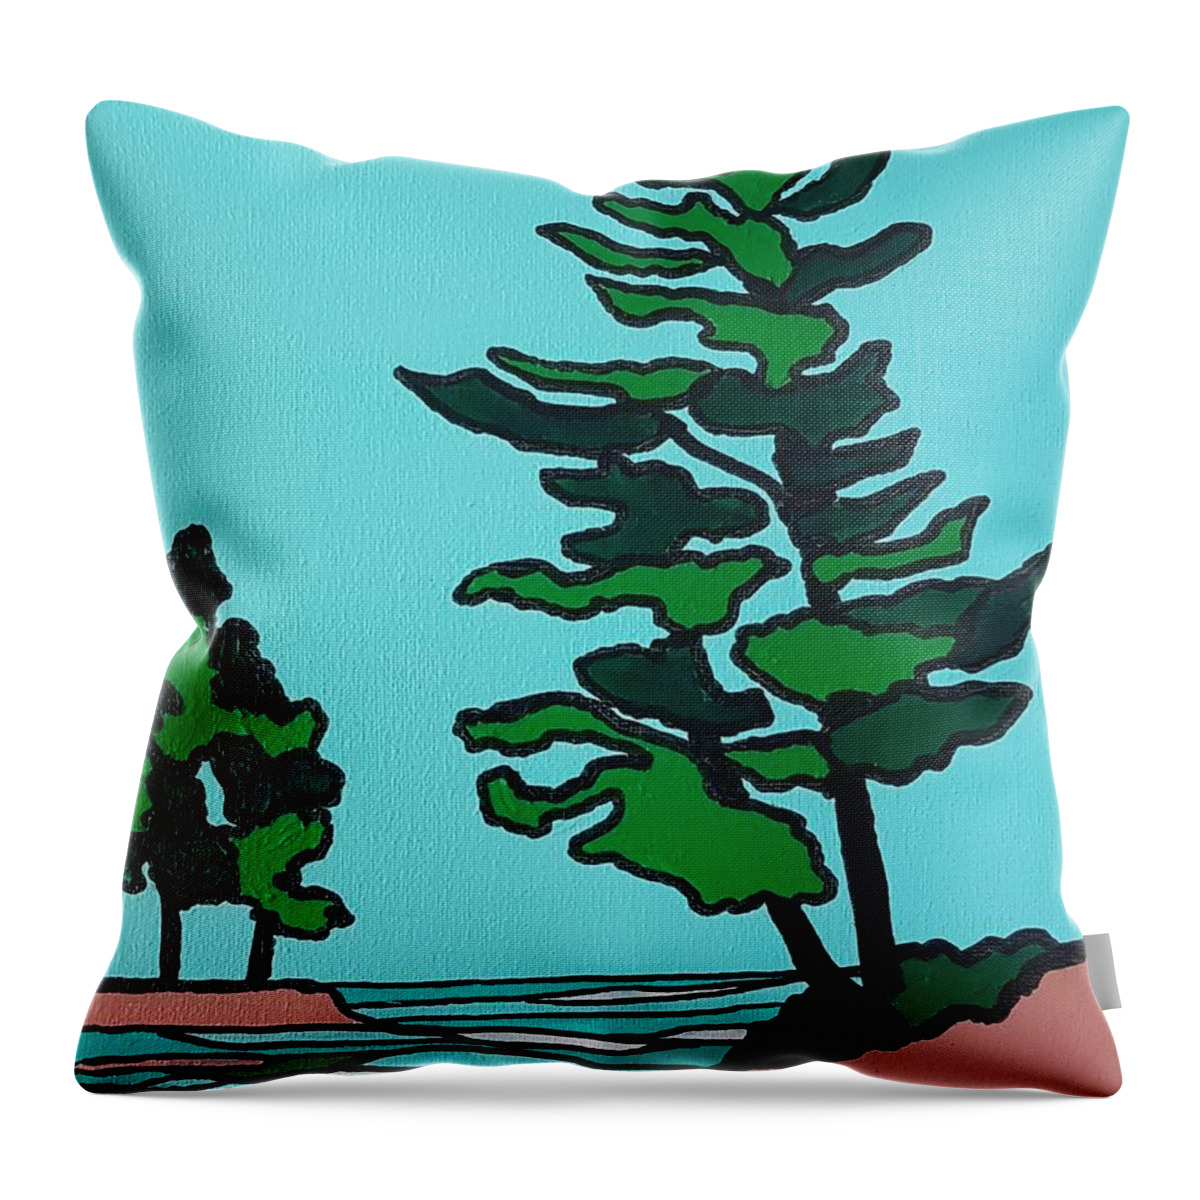 Landscape Throw Pillow featuring the painting Missing You by Petra Burgmann